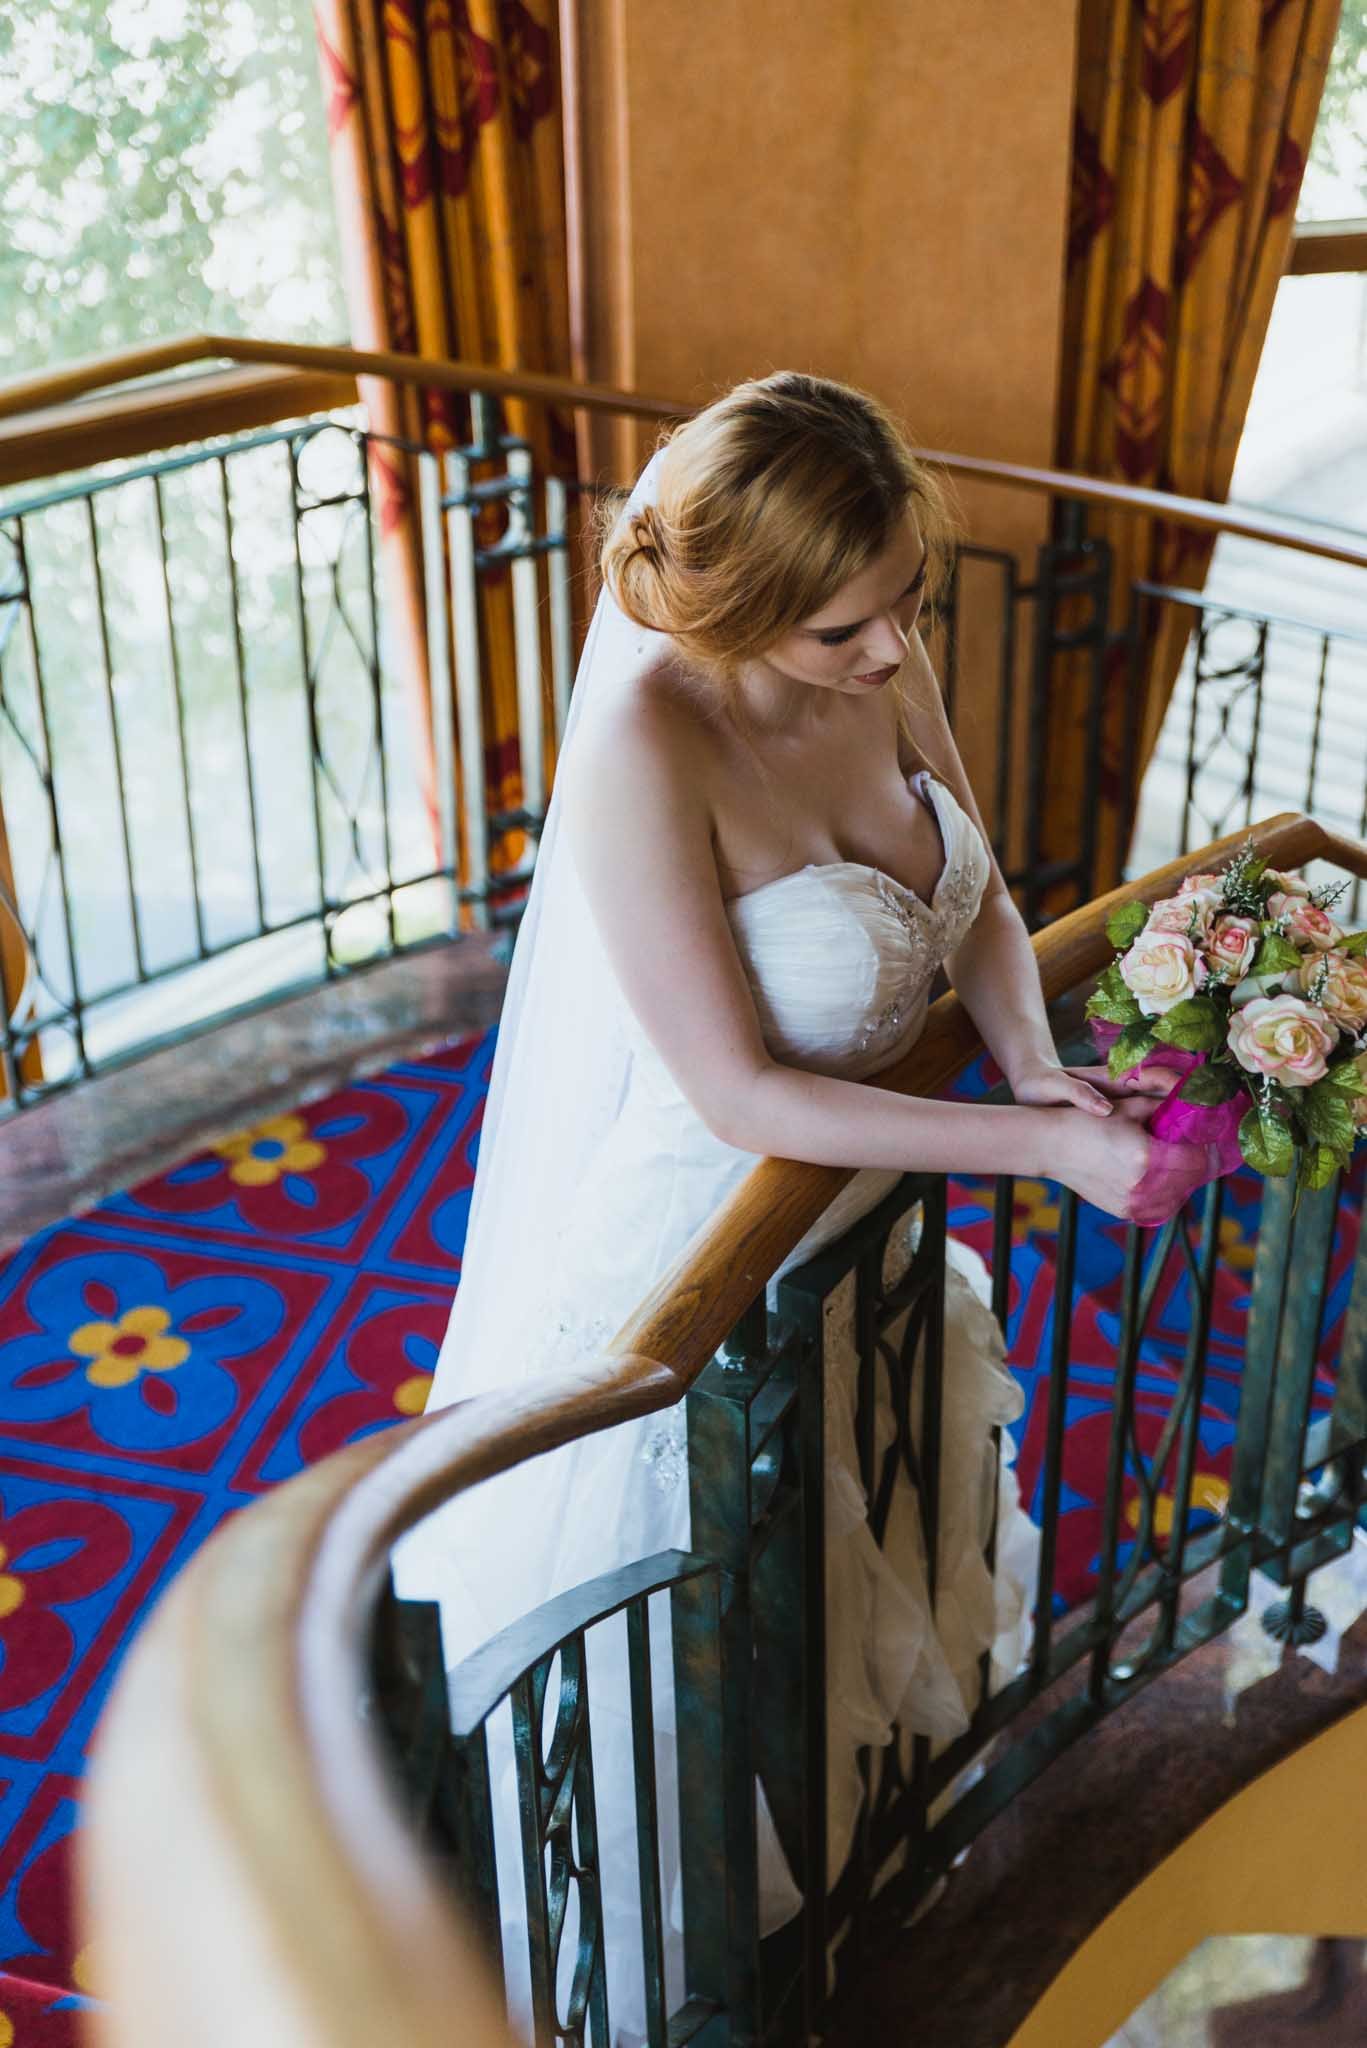  A great wedding venue in Portadown is the Seagoe Hotel as the bride leans over railings inside. 